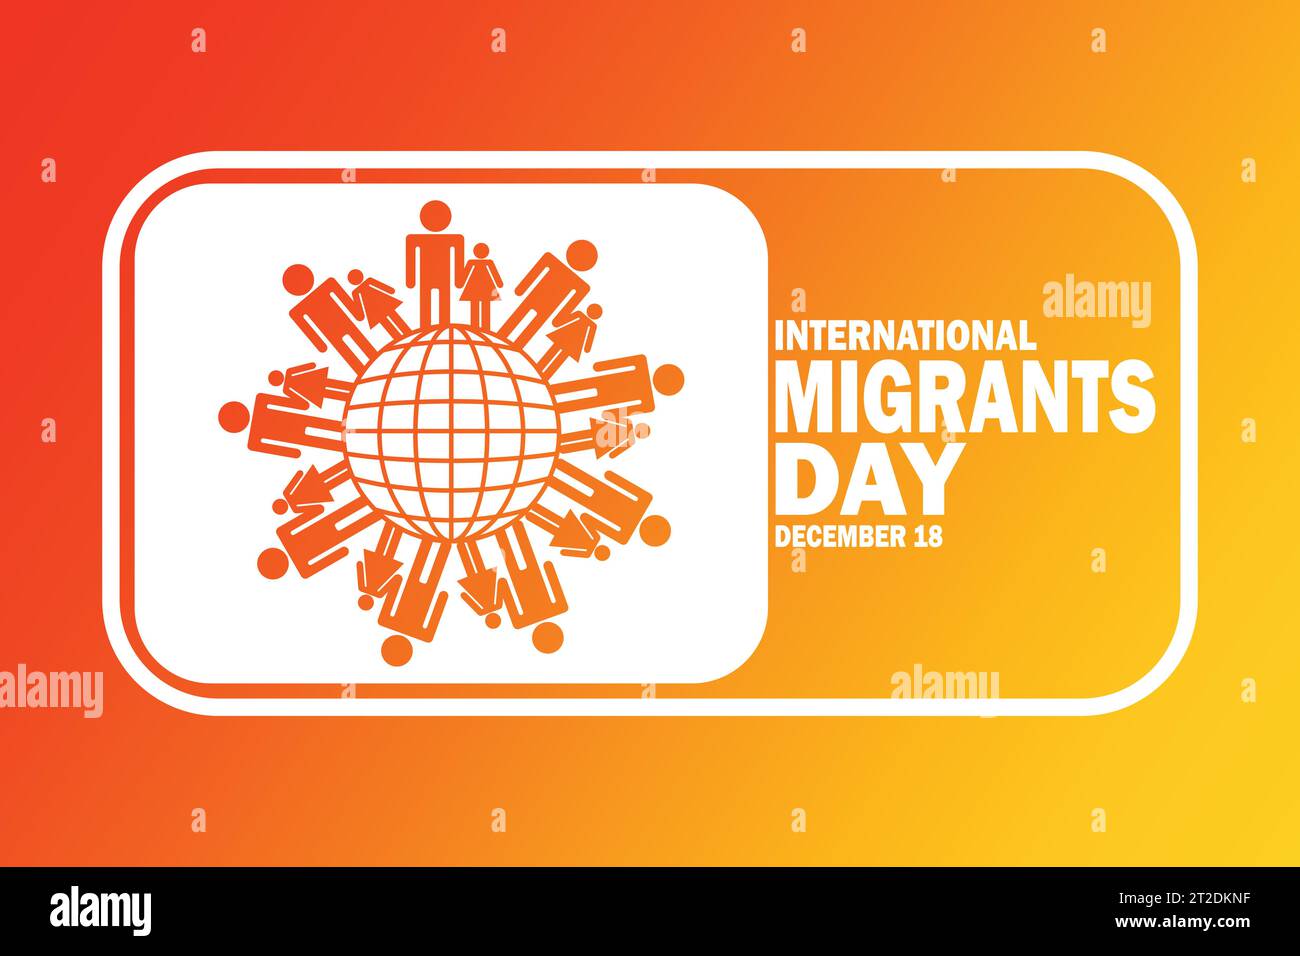 International Migrants Day. December 18. Holiday concept. Template for background, banner, card, poster with text inscription. Stock Vector